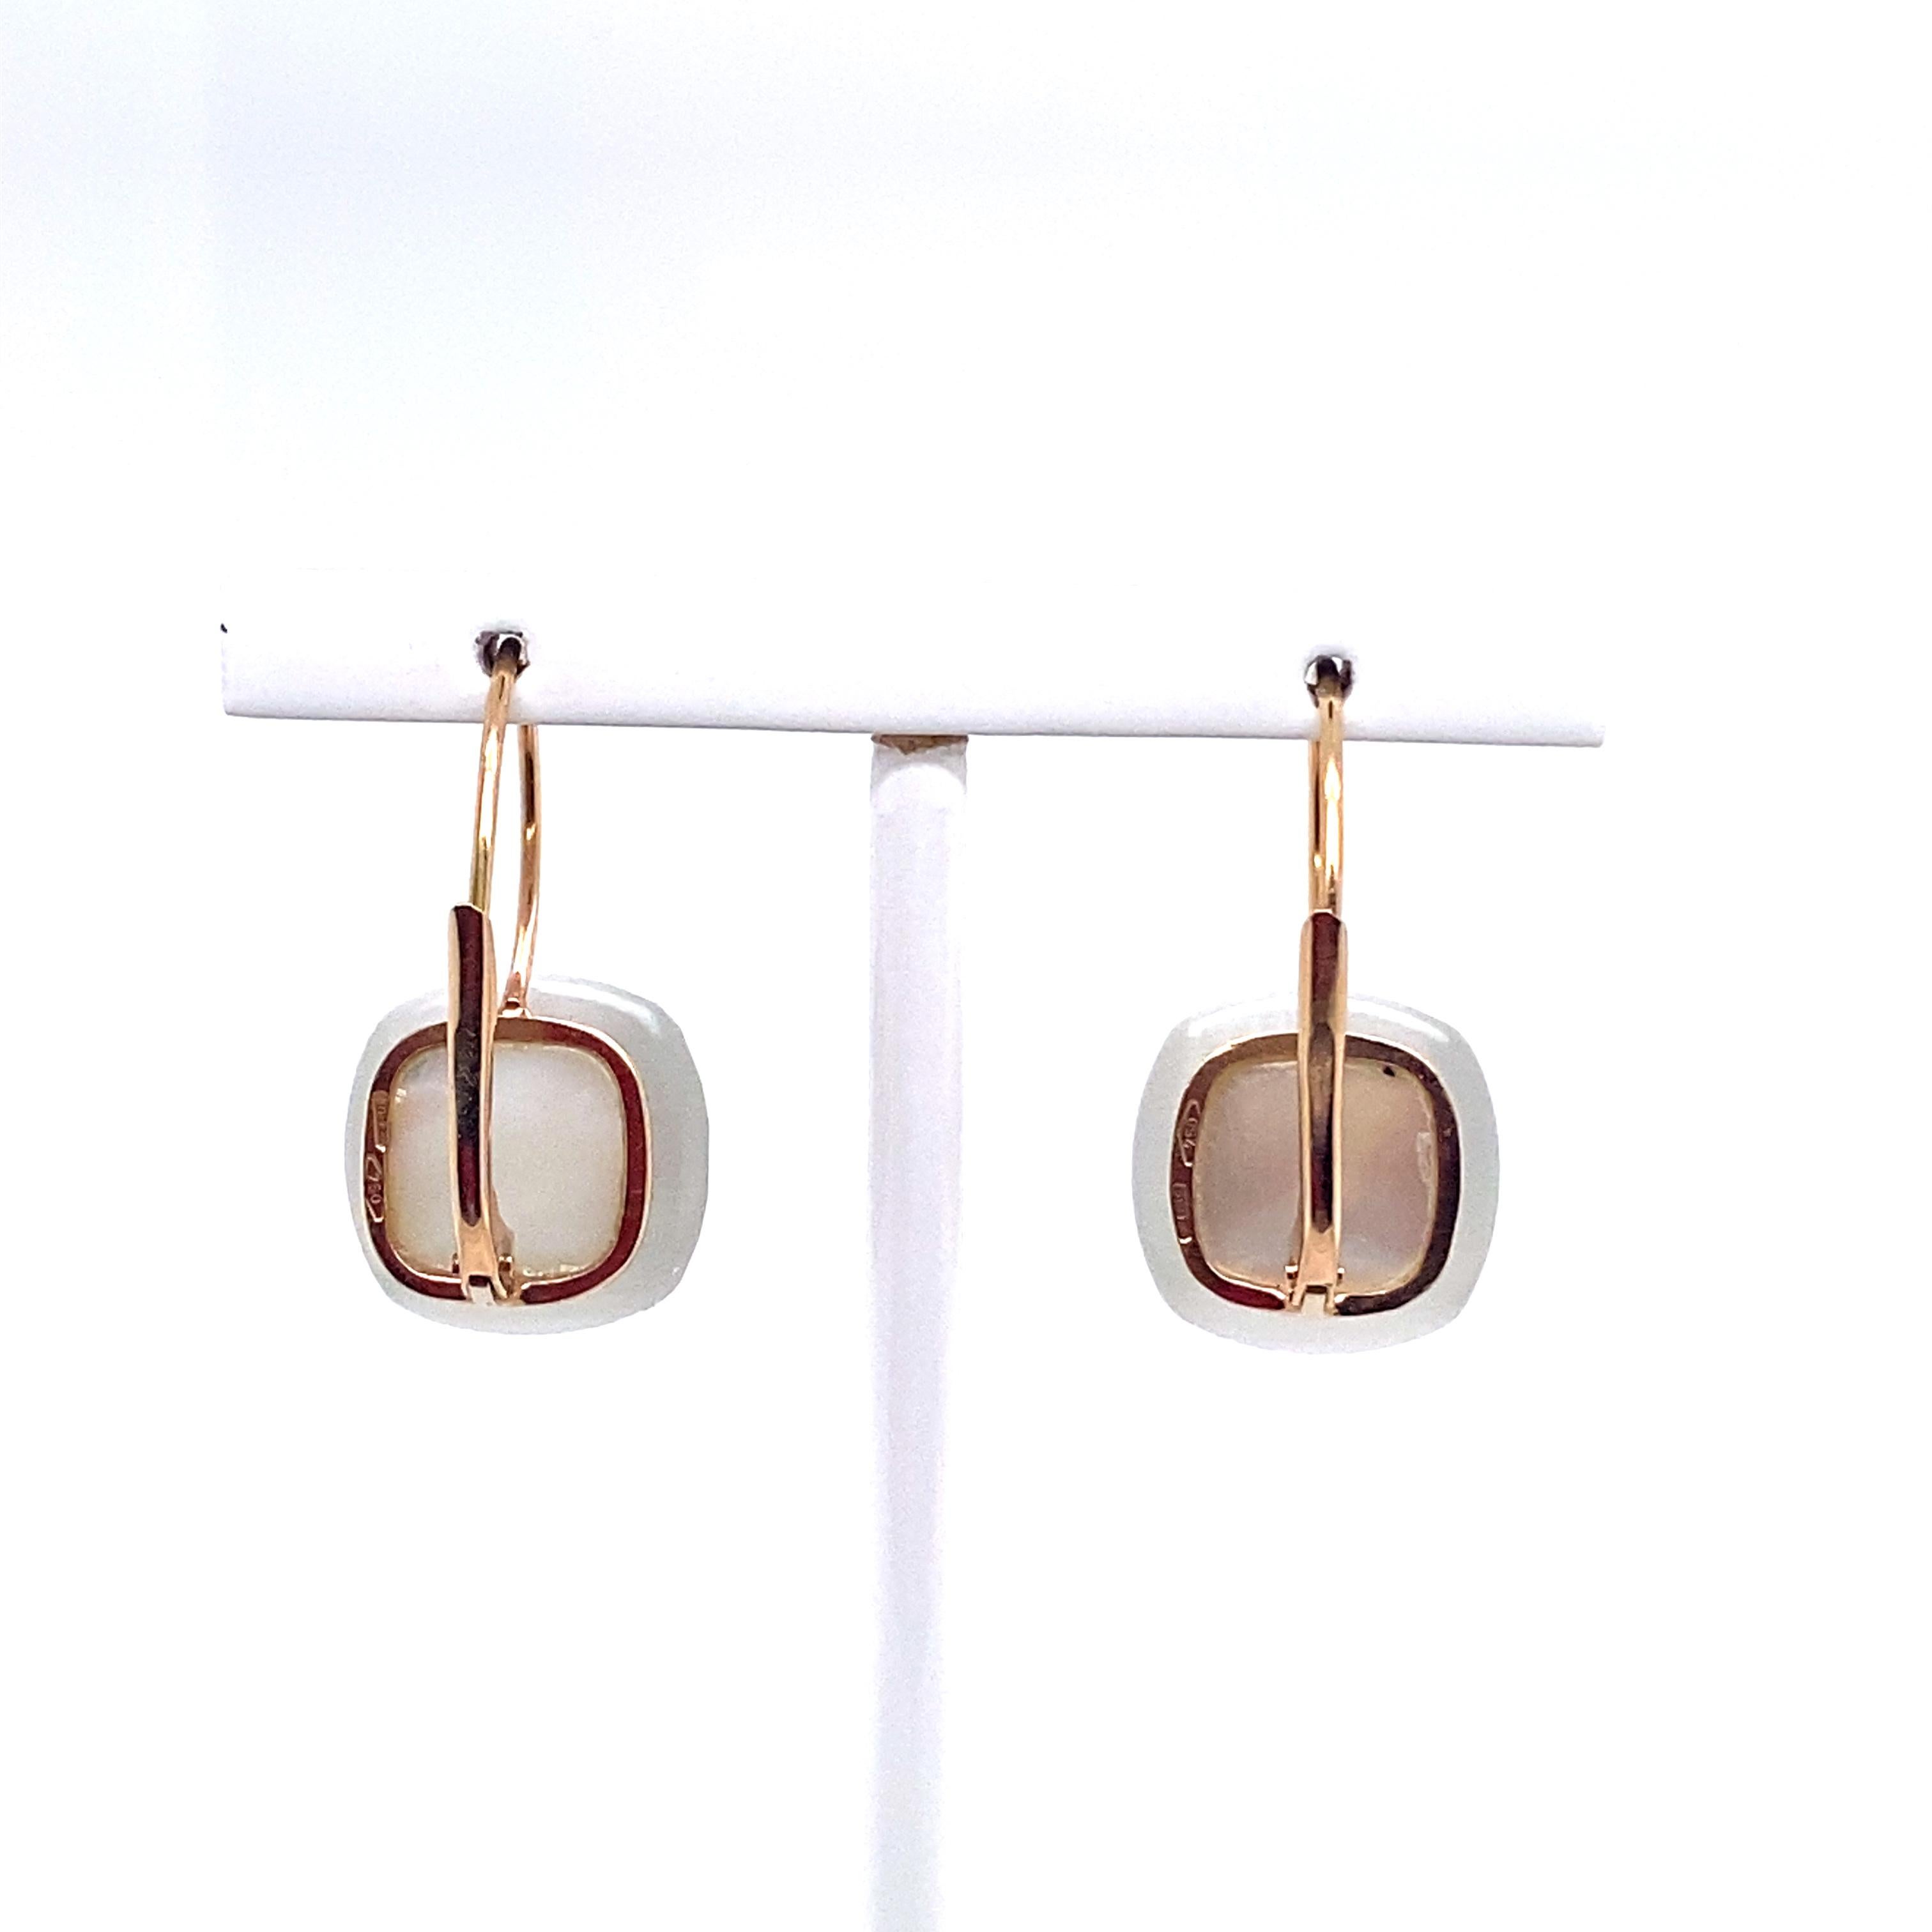 Model Lever-Back with a Grey Hydro Quartz Earrings Gold 18 Karat   For Sale 4